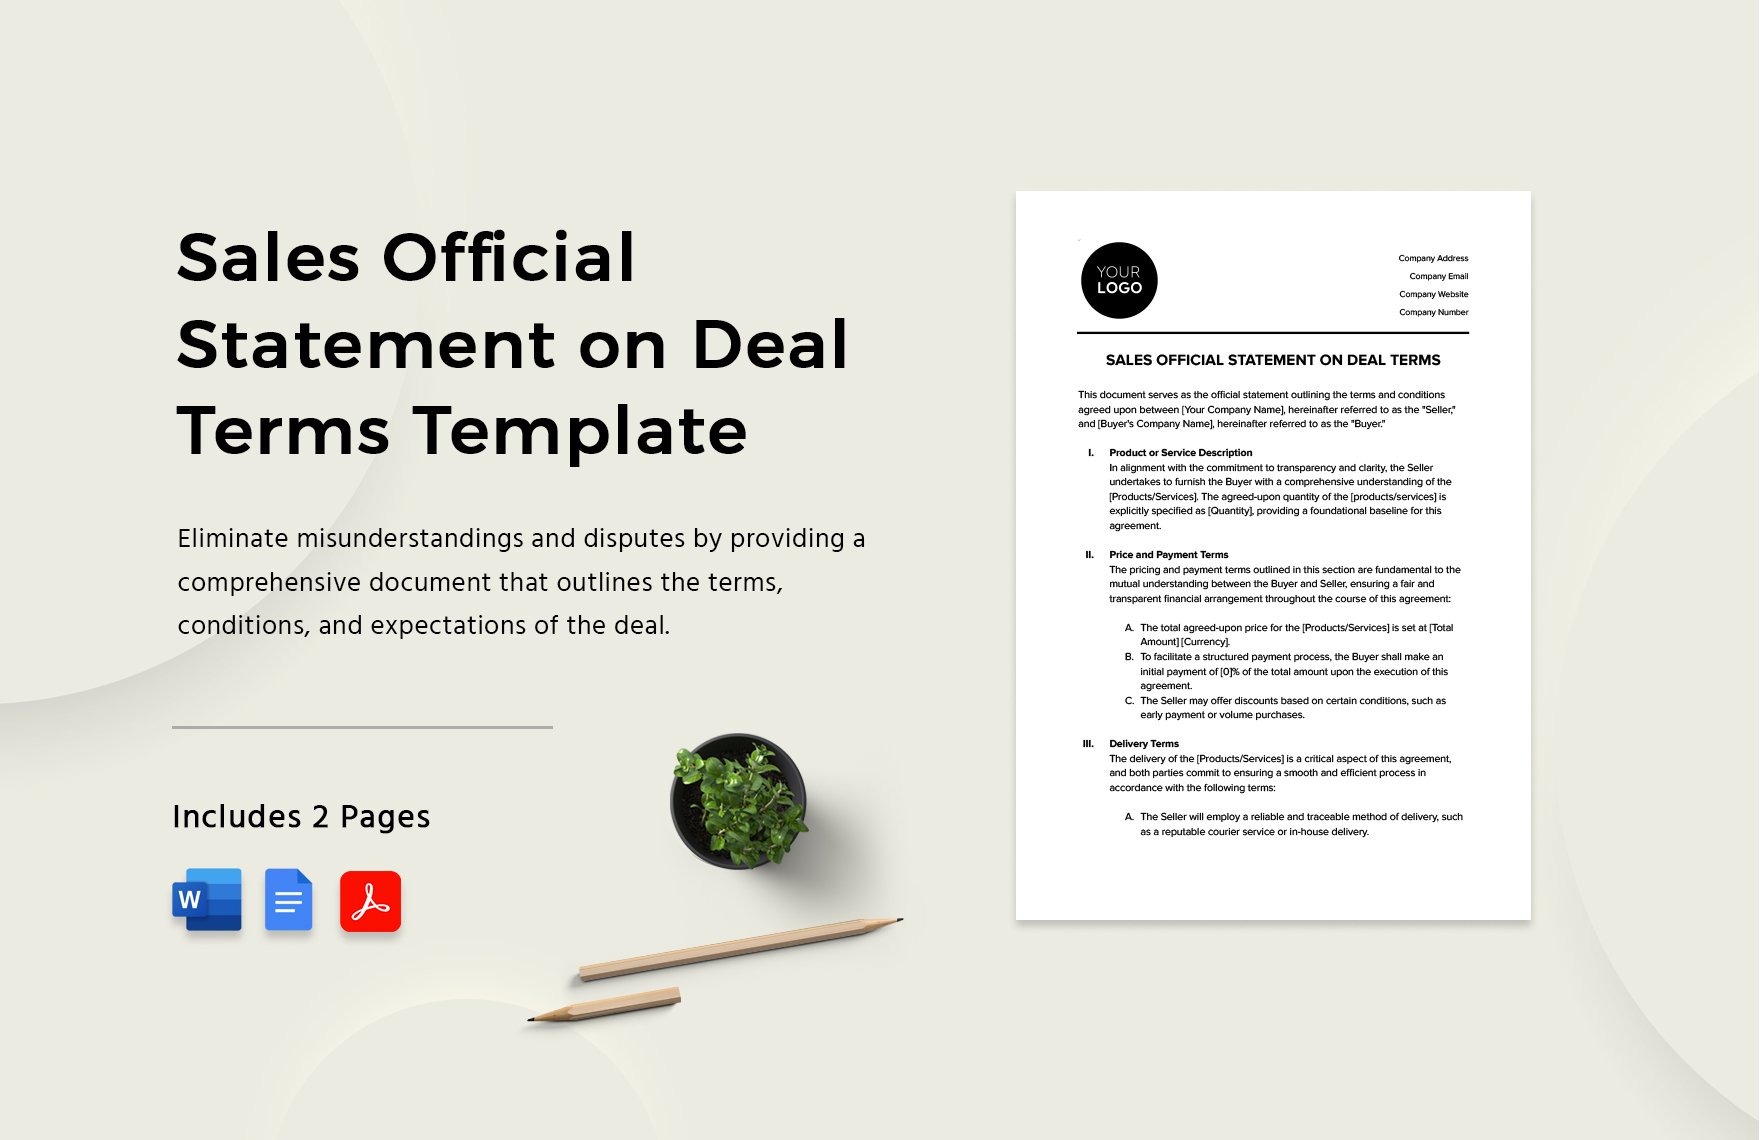  Sales Official Statement on Deal Terms Template